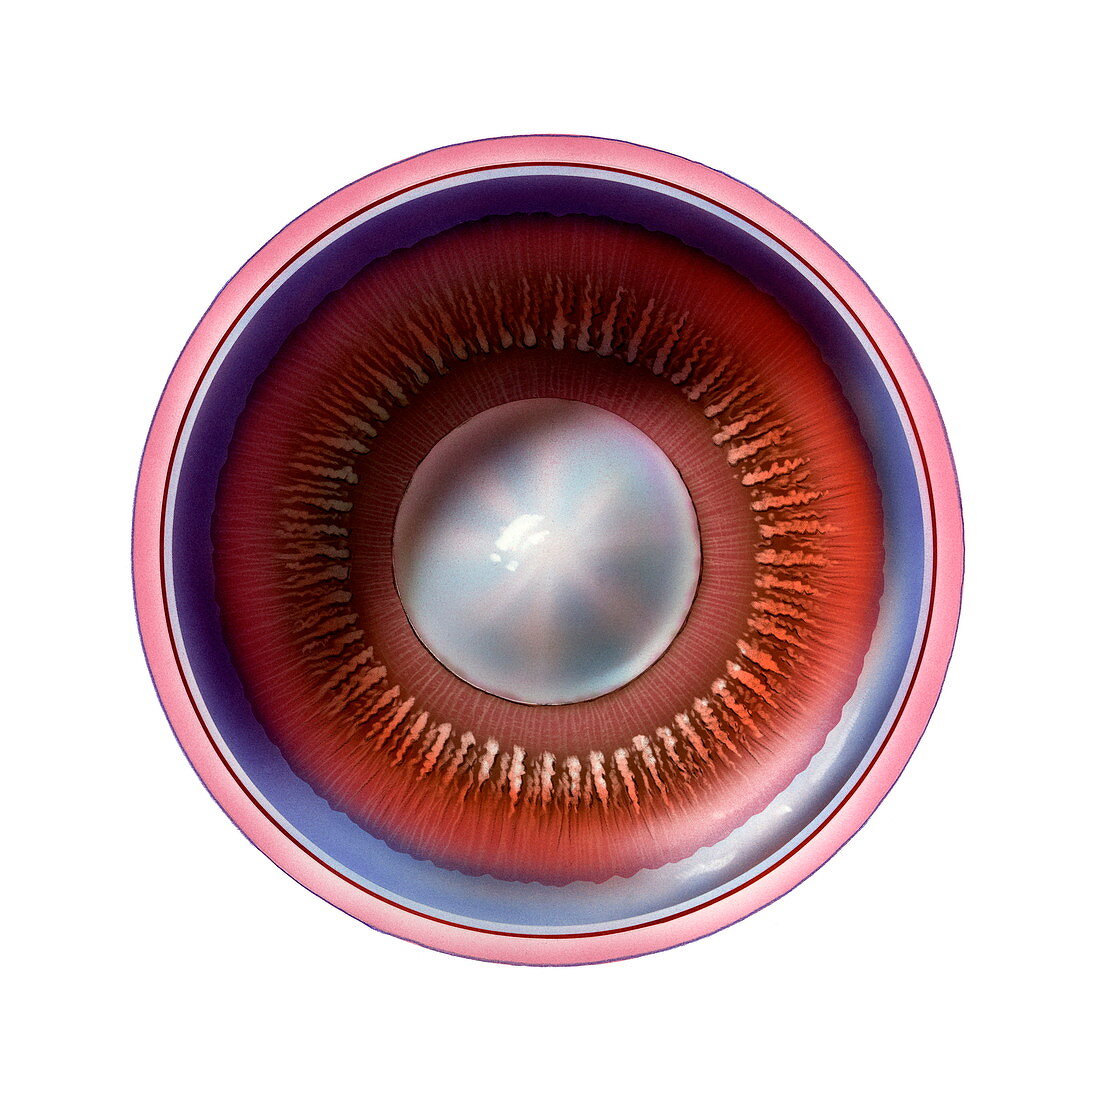 Ciliary body and lens